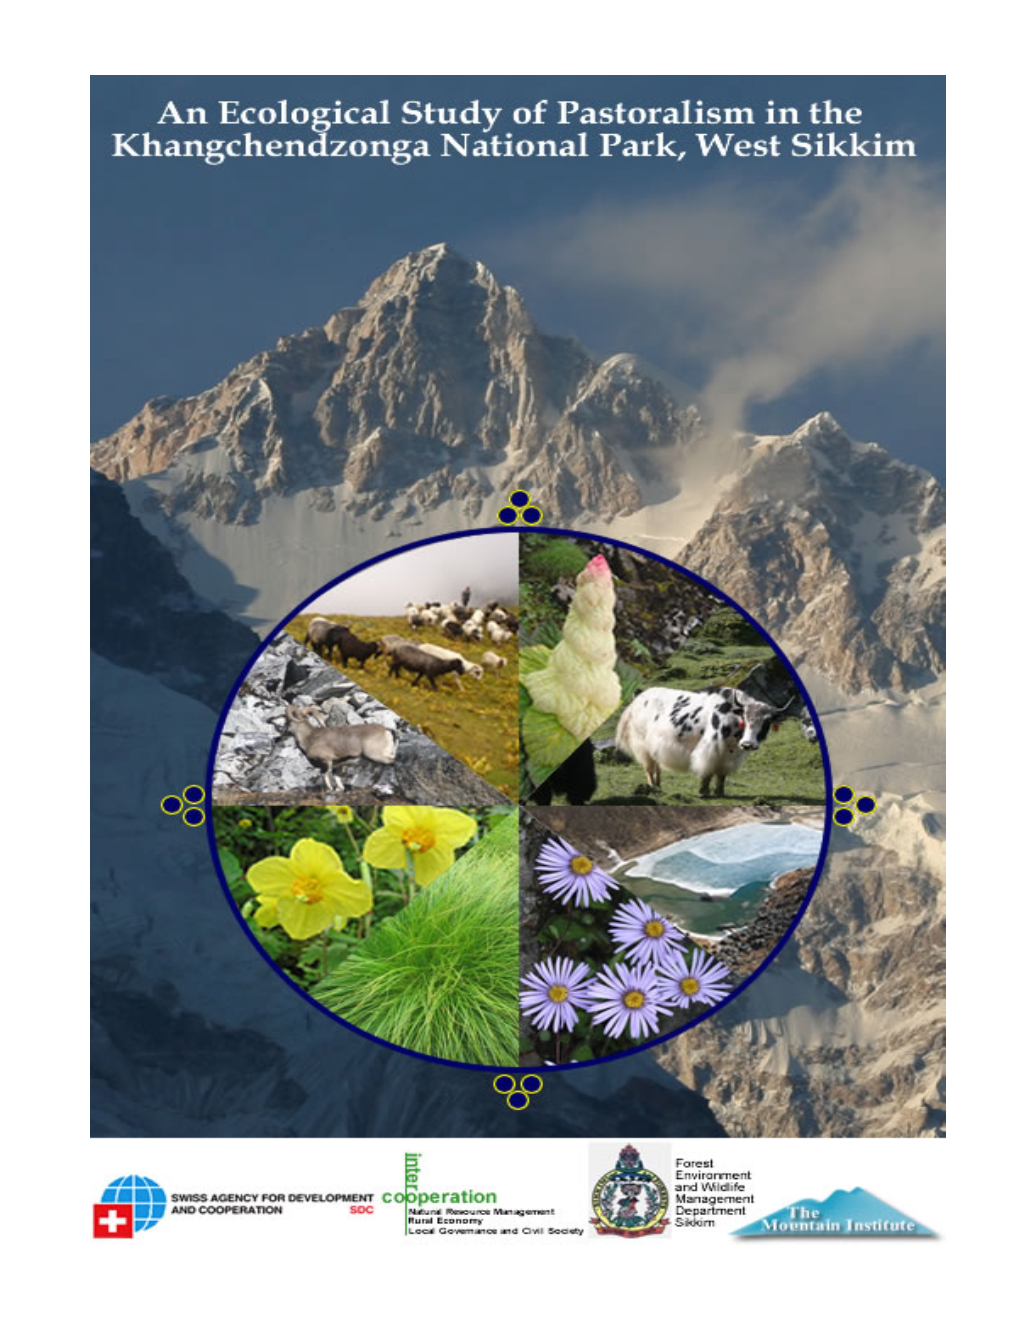 An Ecological Study of Pastoralism in the Khangchendzonga National Park, West Sikkim